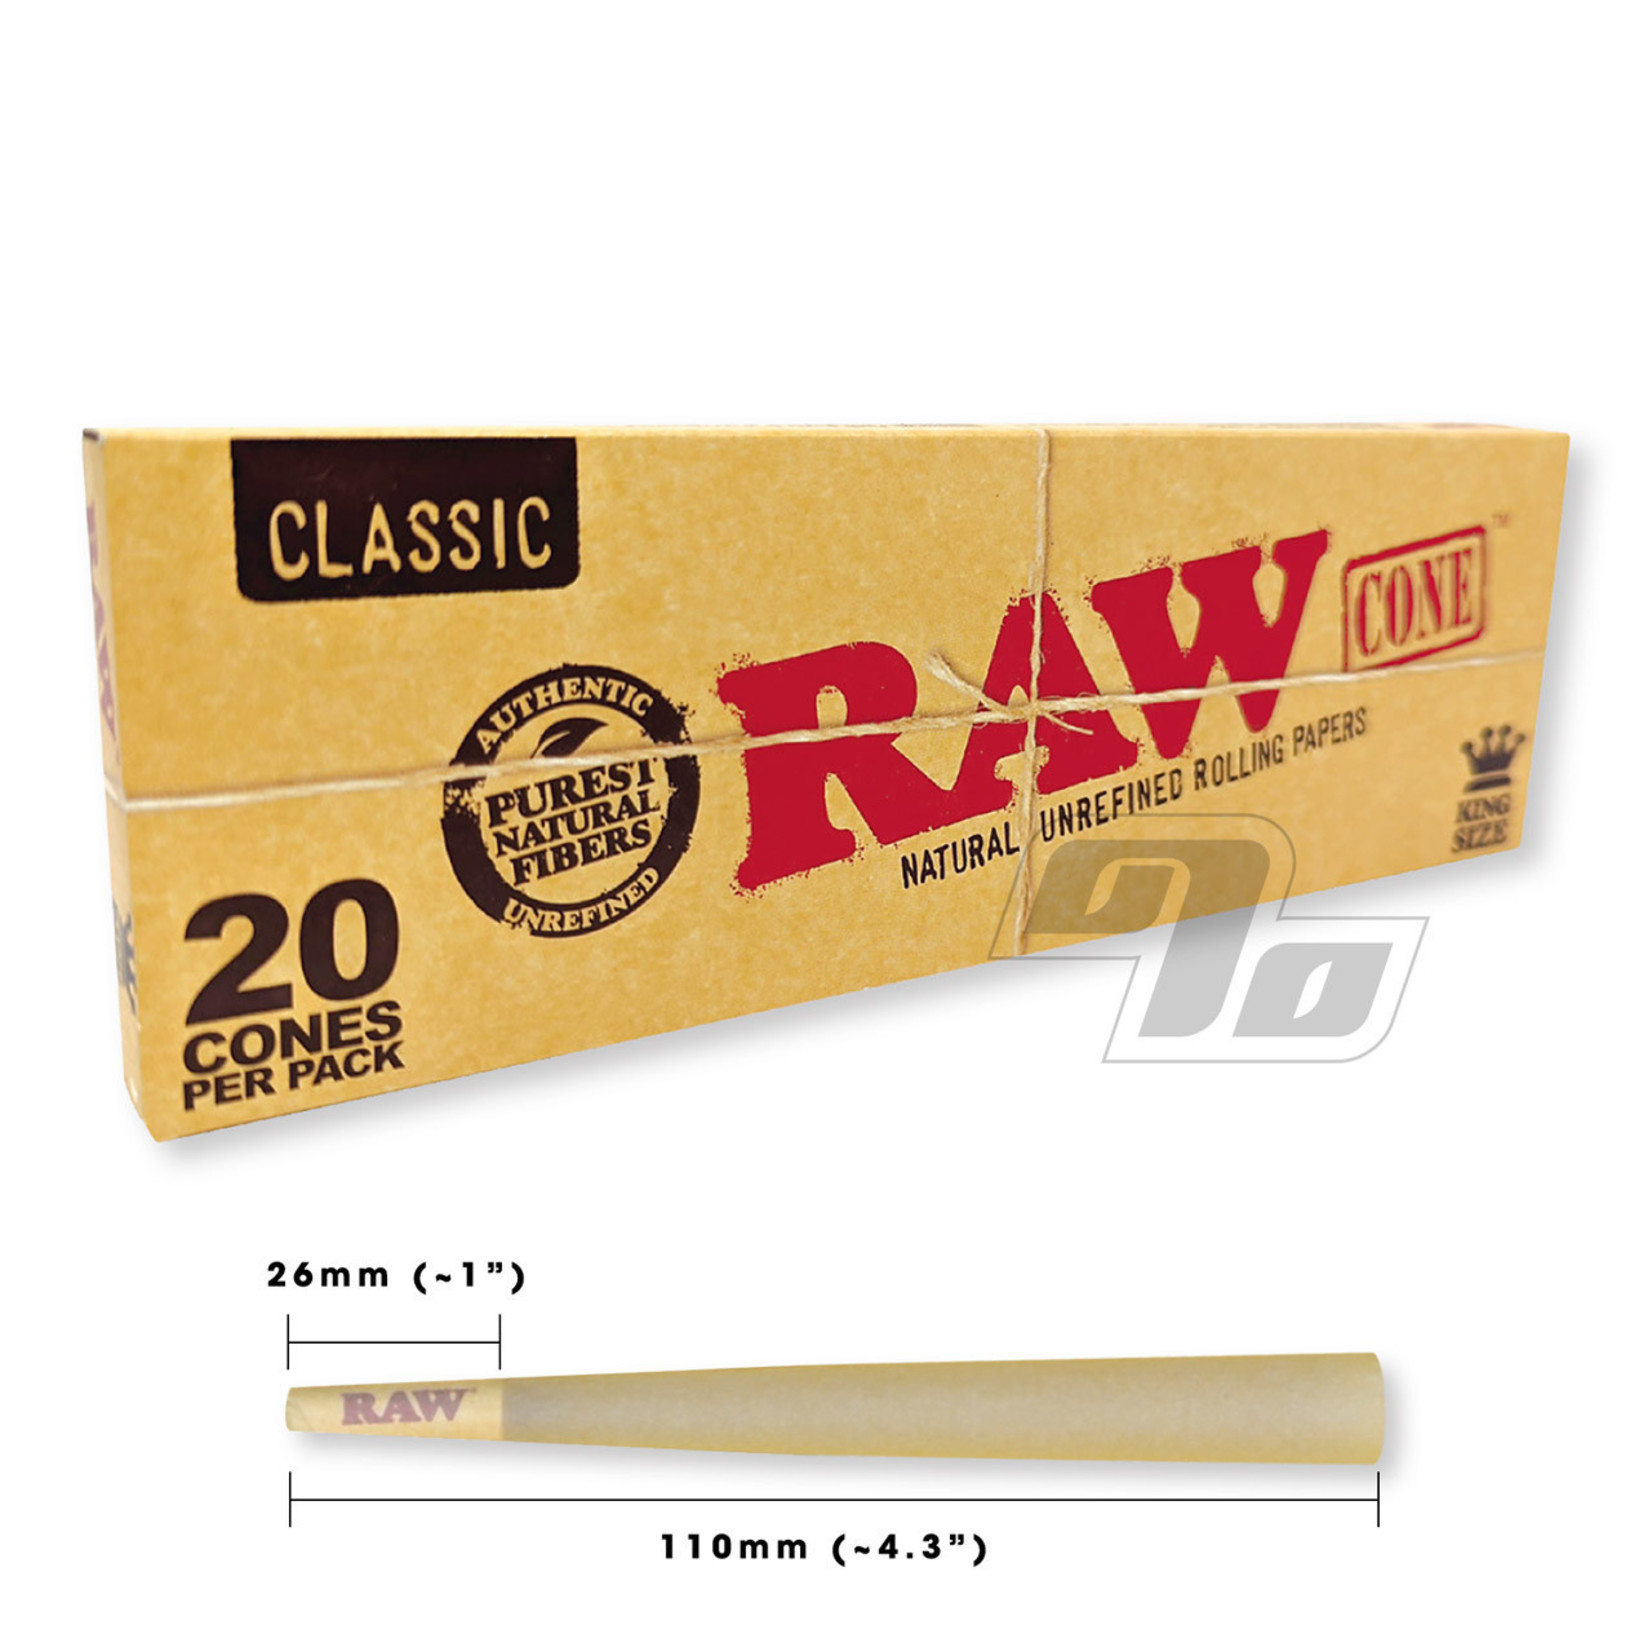 RAW RAW 20 PACK CONES KING SIZE